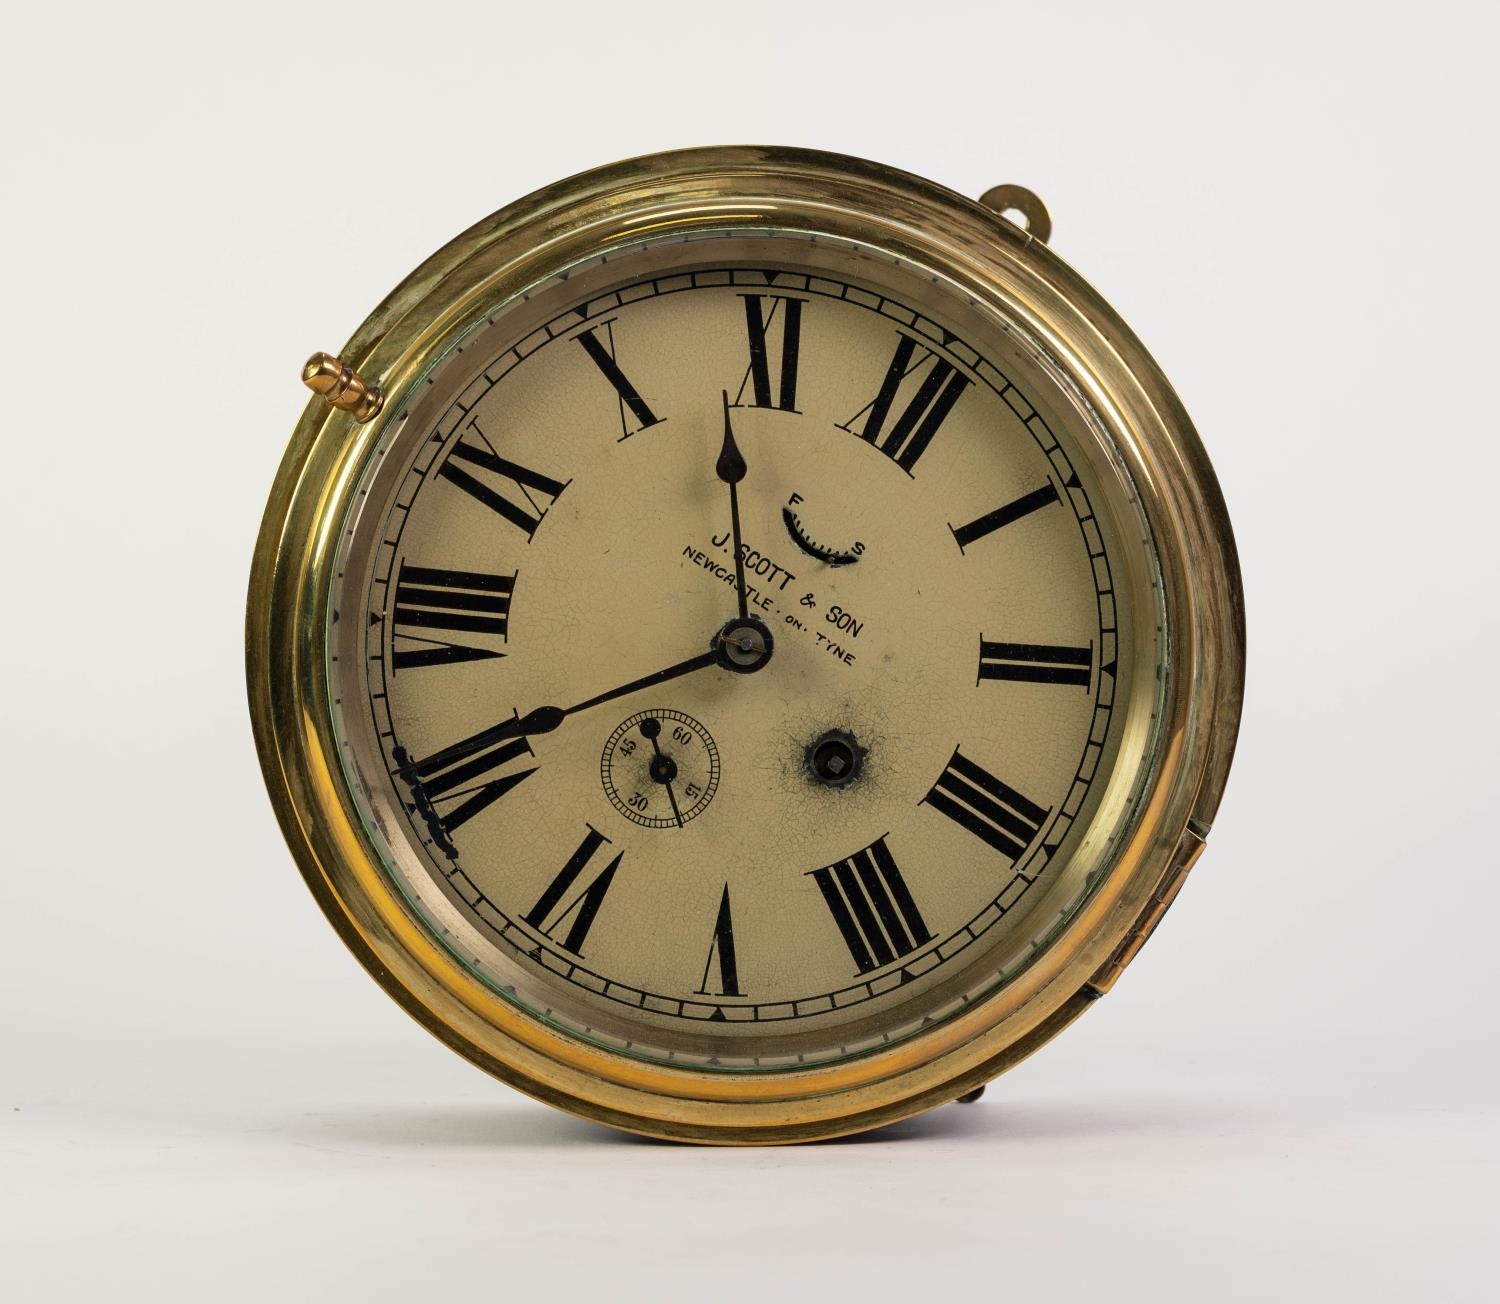 J. SCOTT & SON, NEWCASTLE UPON TYNE BRASS FRONTED SHIP?S PORT HOLE WALL CLOCK, of typical form